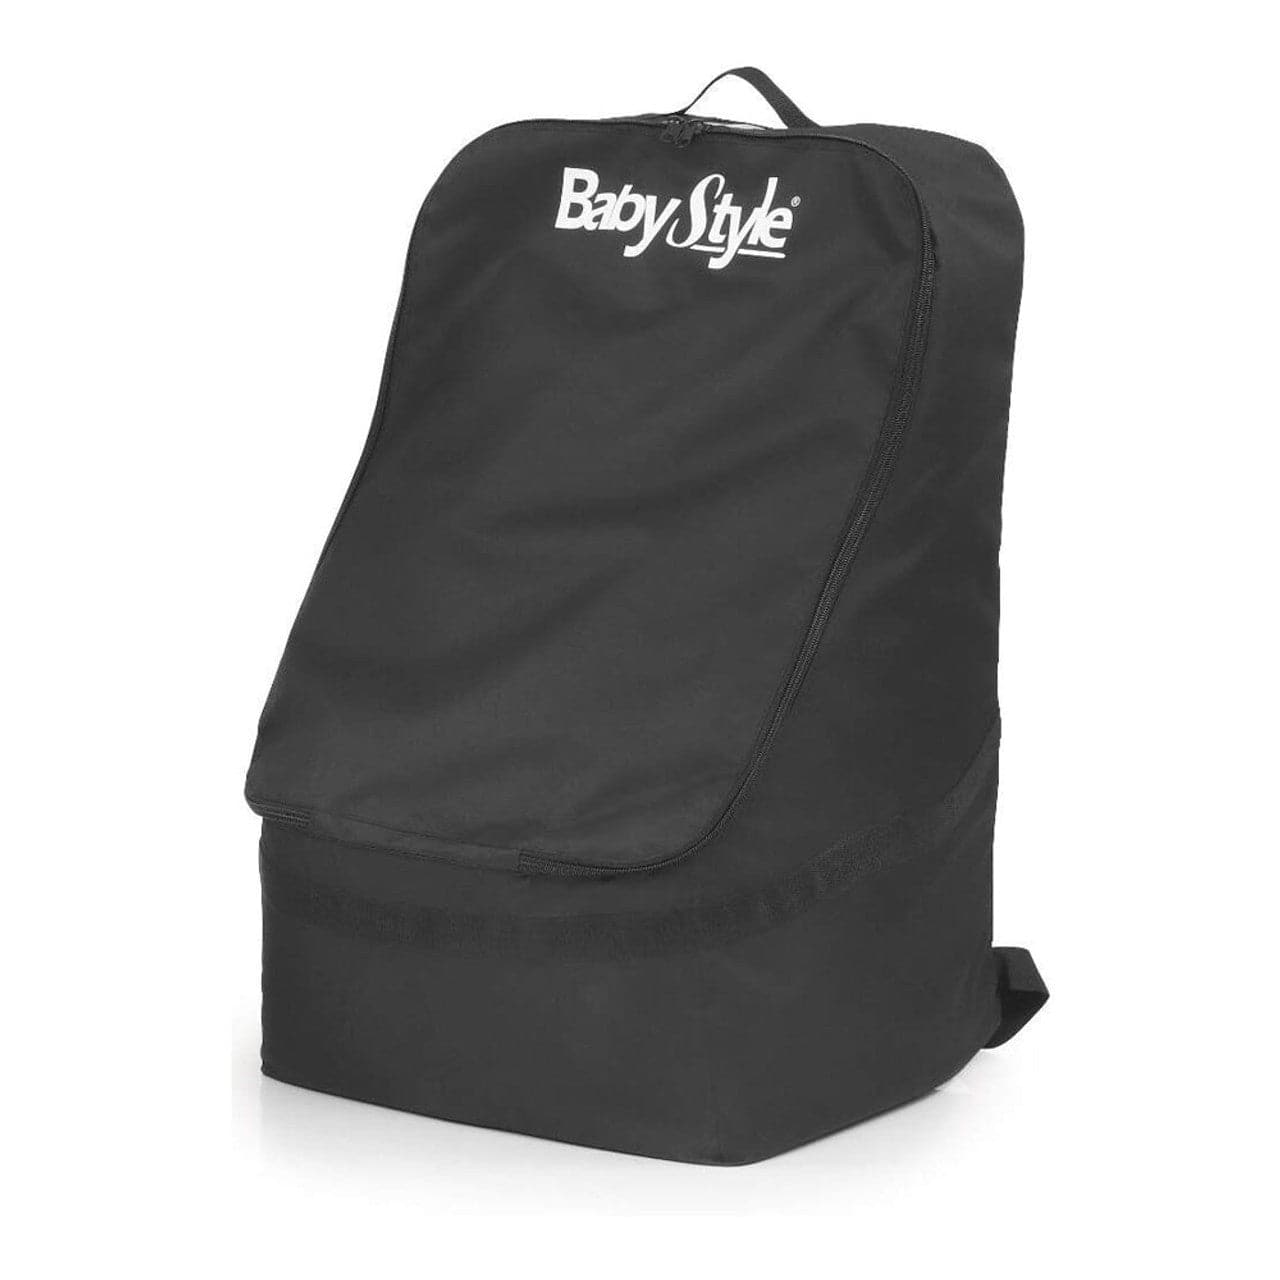 Babystyle Egg Travel Bag - Black - For Your Little One